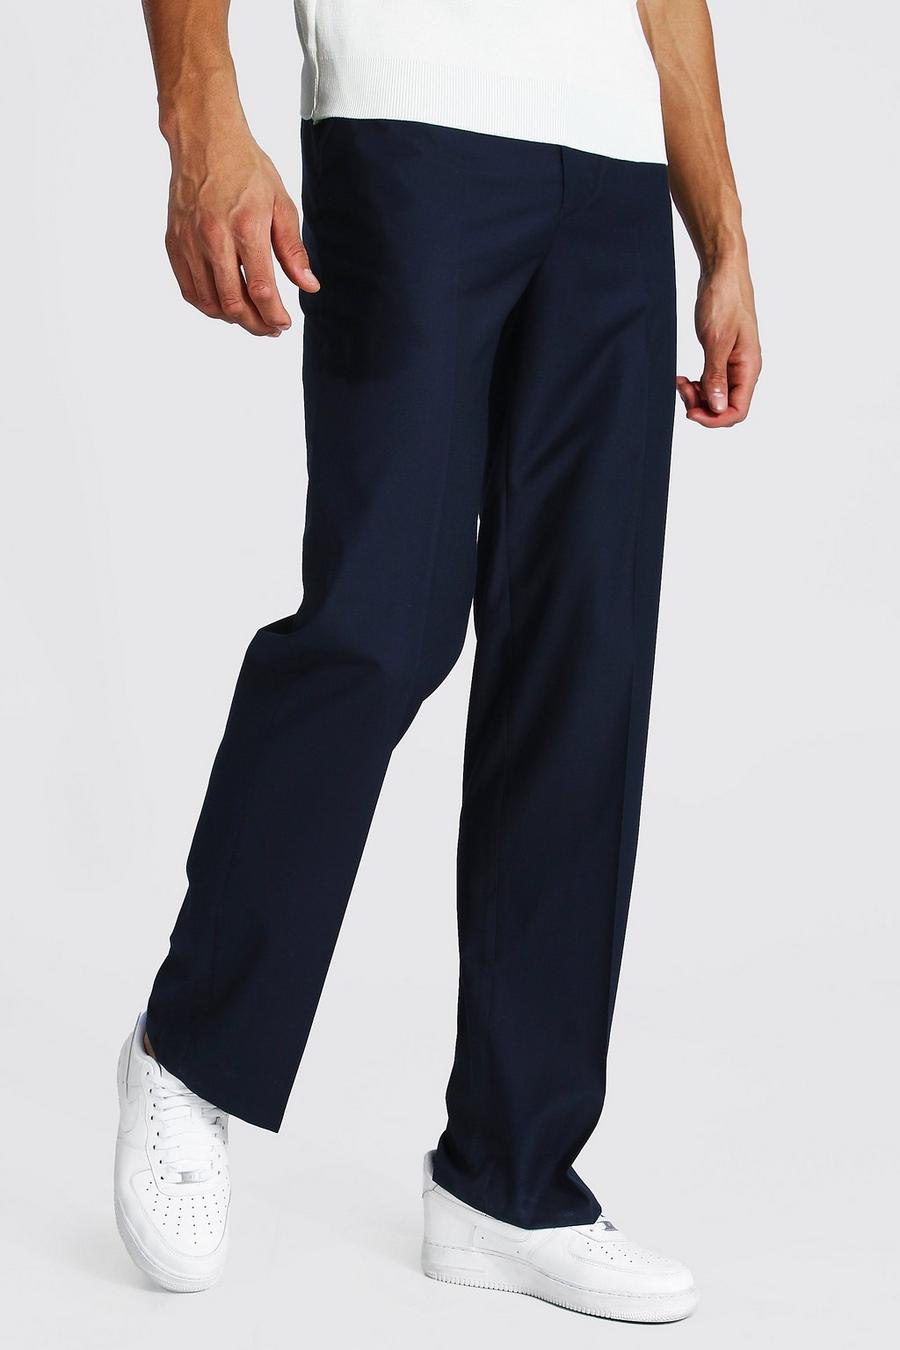 Navy Tall Straight Leg Pants image number 1